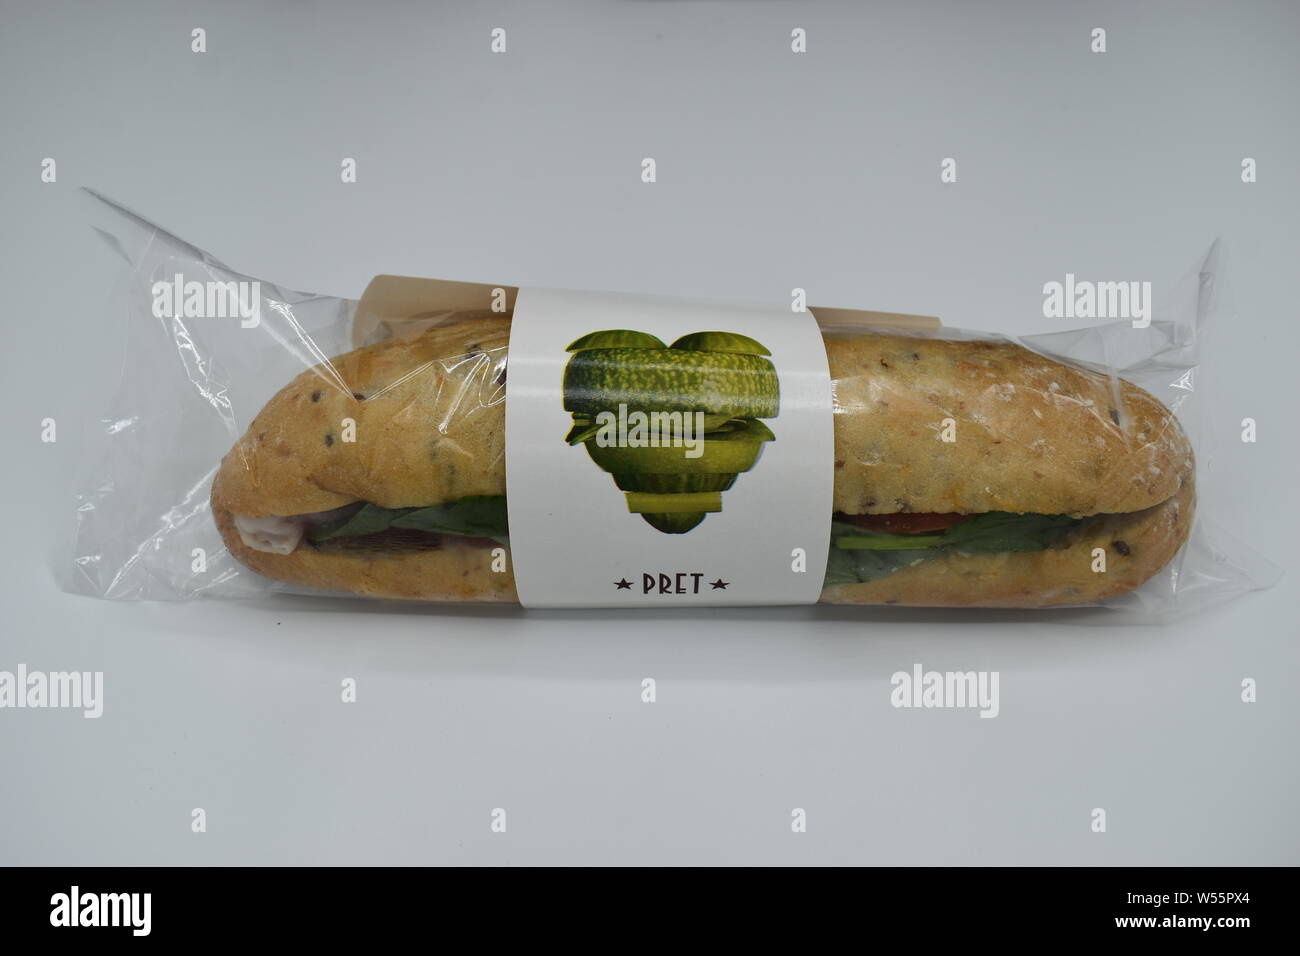 Pret Italian Prosciutto Baguette includes free-range egg yolk, wheat and sesame seeds.  Shown unopened in packaging. Stock Photo